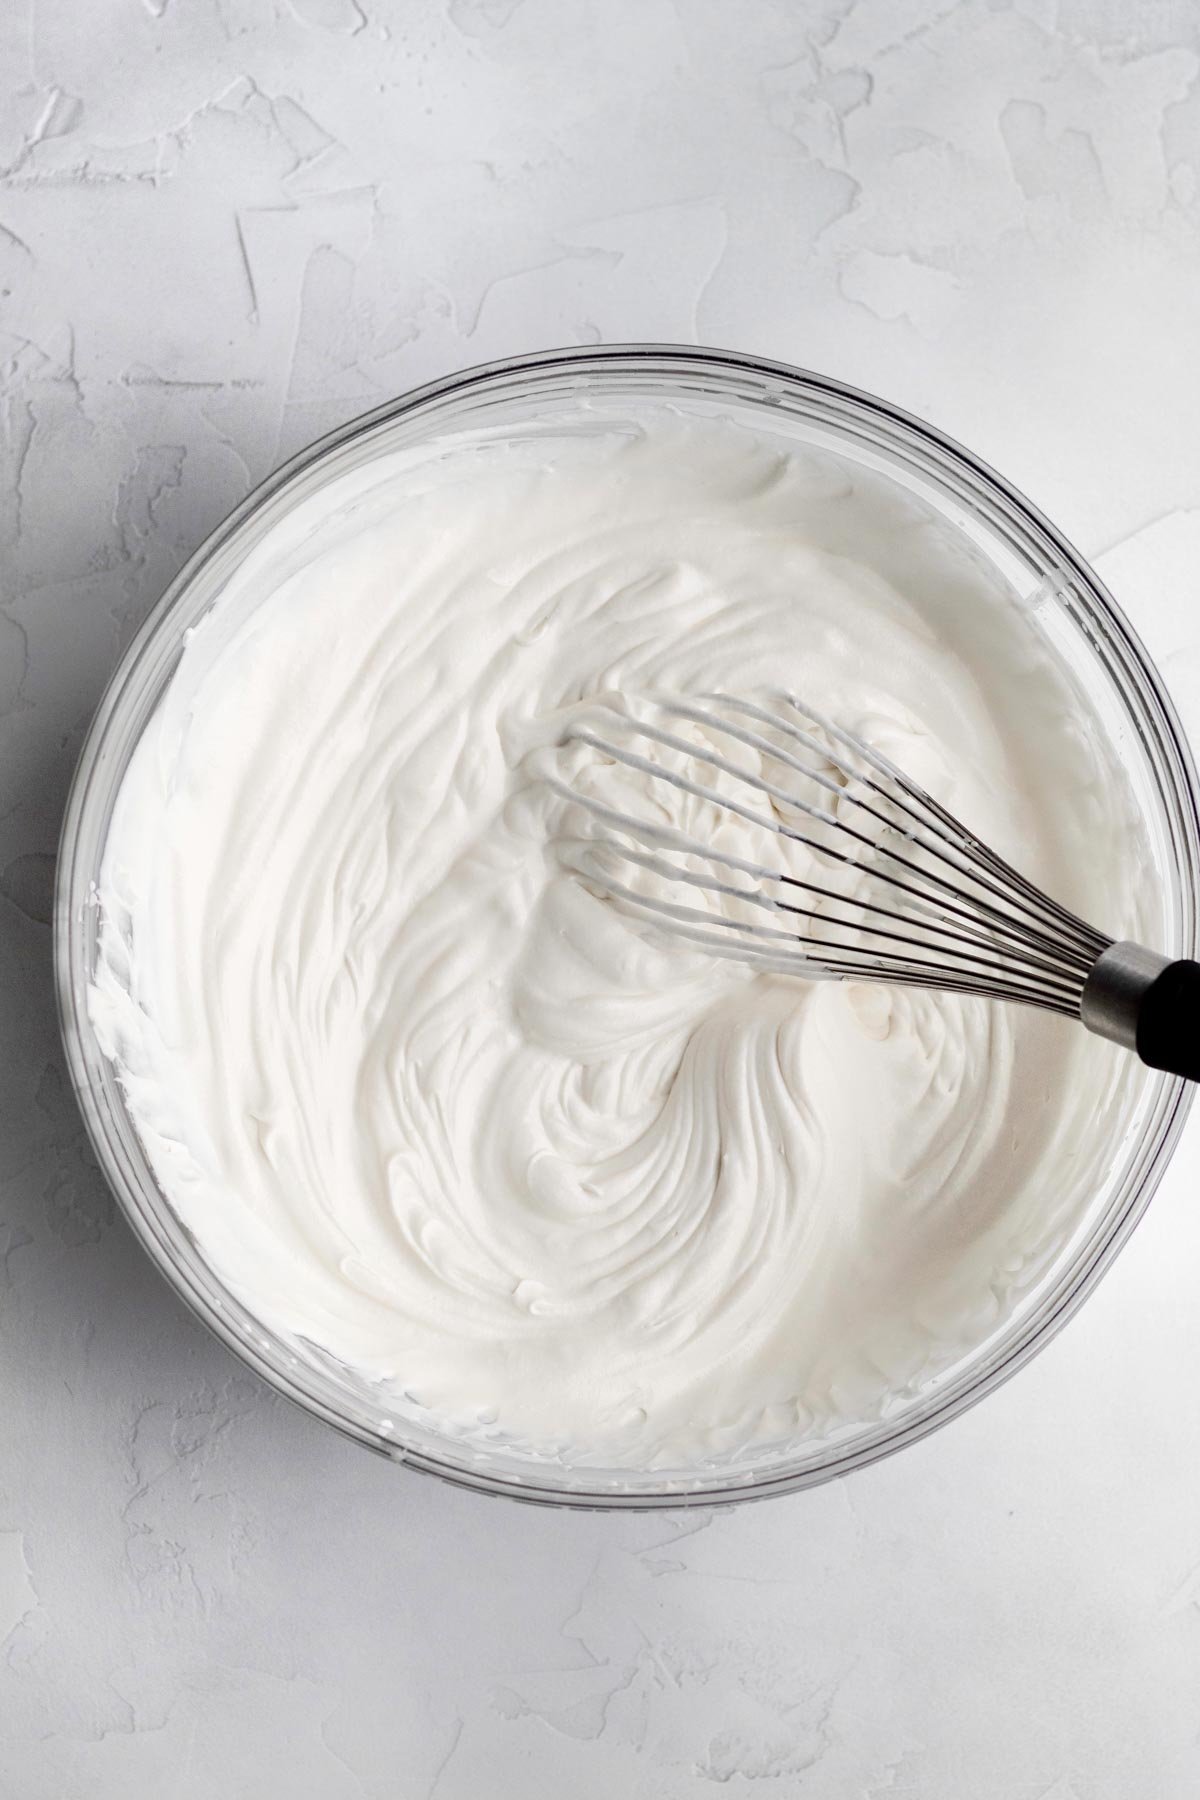 Whisking everything together into a milky white mixture.